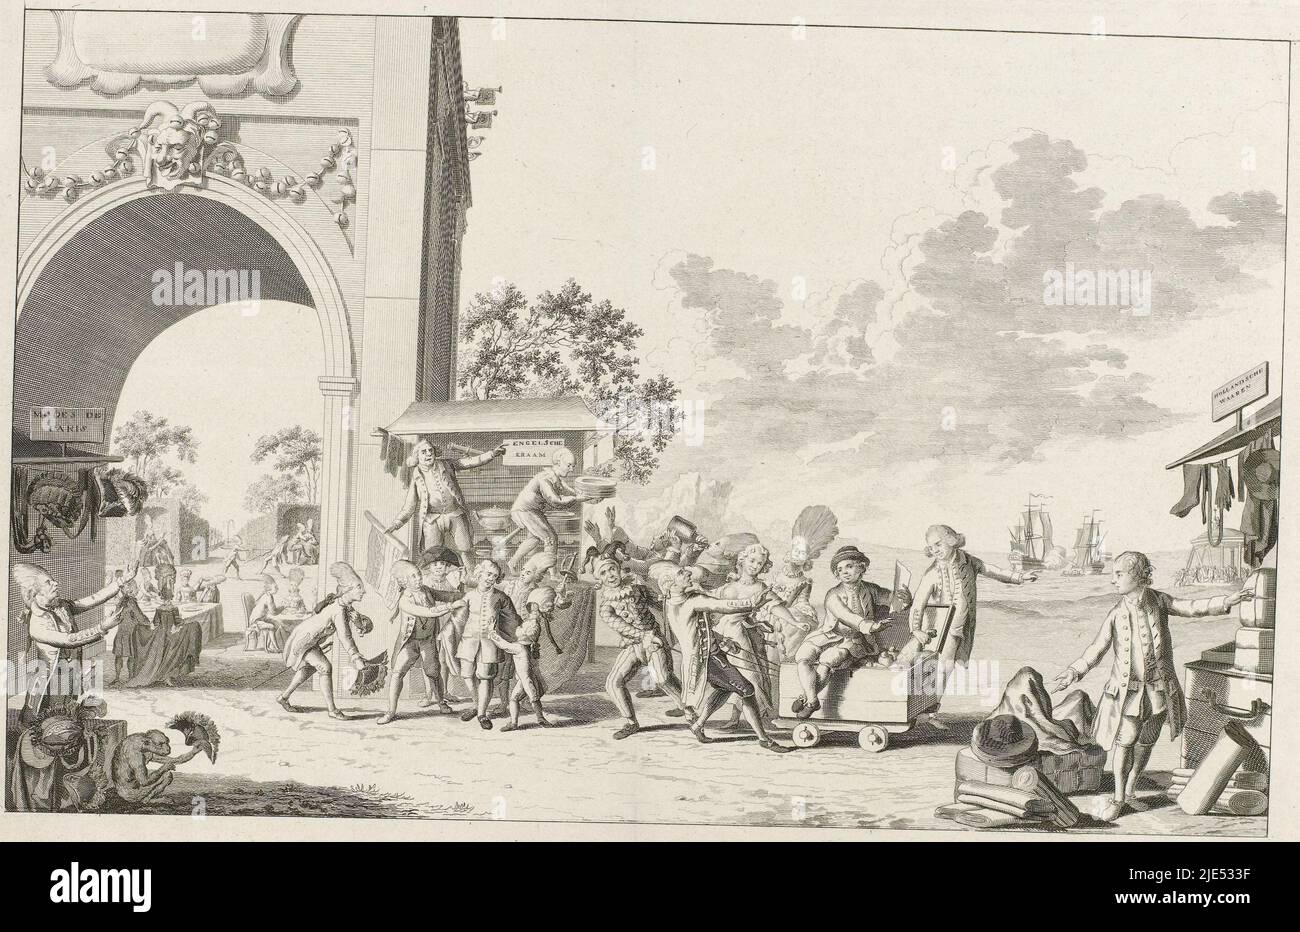 Cartoon on the English-speaking, wavering and entertaining spirit of young Holland, 1780. A young rich Dutchman sitting on a money box rejects the stall with the Dutch wares and allows himself to be driven to the English stall and the French stall with the Modes de Paris. See also the counterpart. The print is accompanied by a separately printed explanation (missing here), Cartoon on the English minded young Holland, 1780., print maker: anonymous, Northern Netherlands, 1780, paper, etching, engraving, h 253 mm × w 380 mm Stock Photo